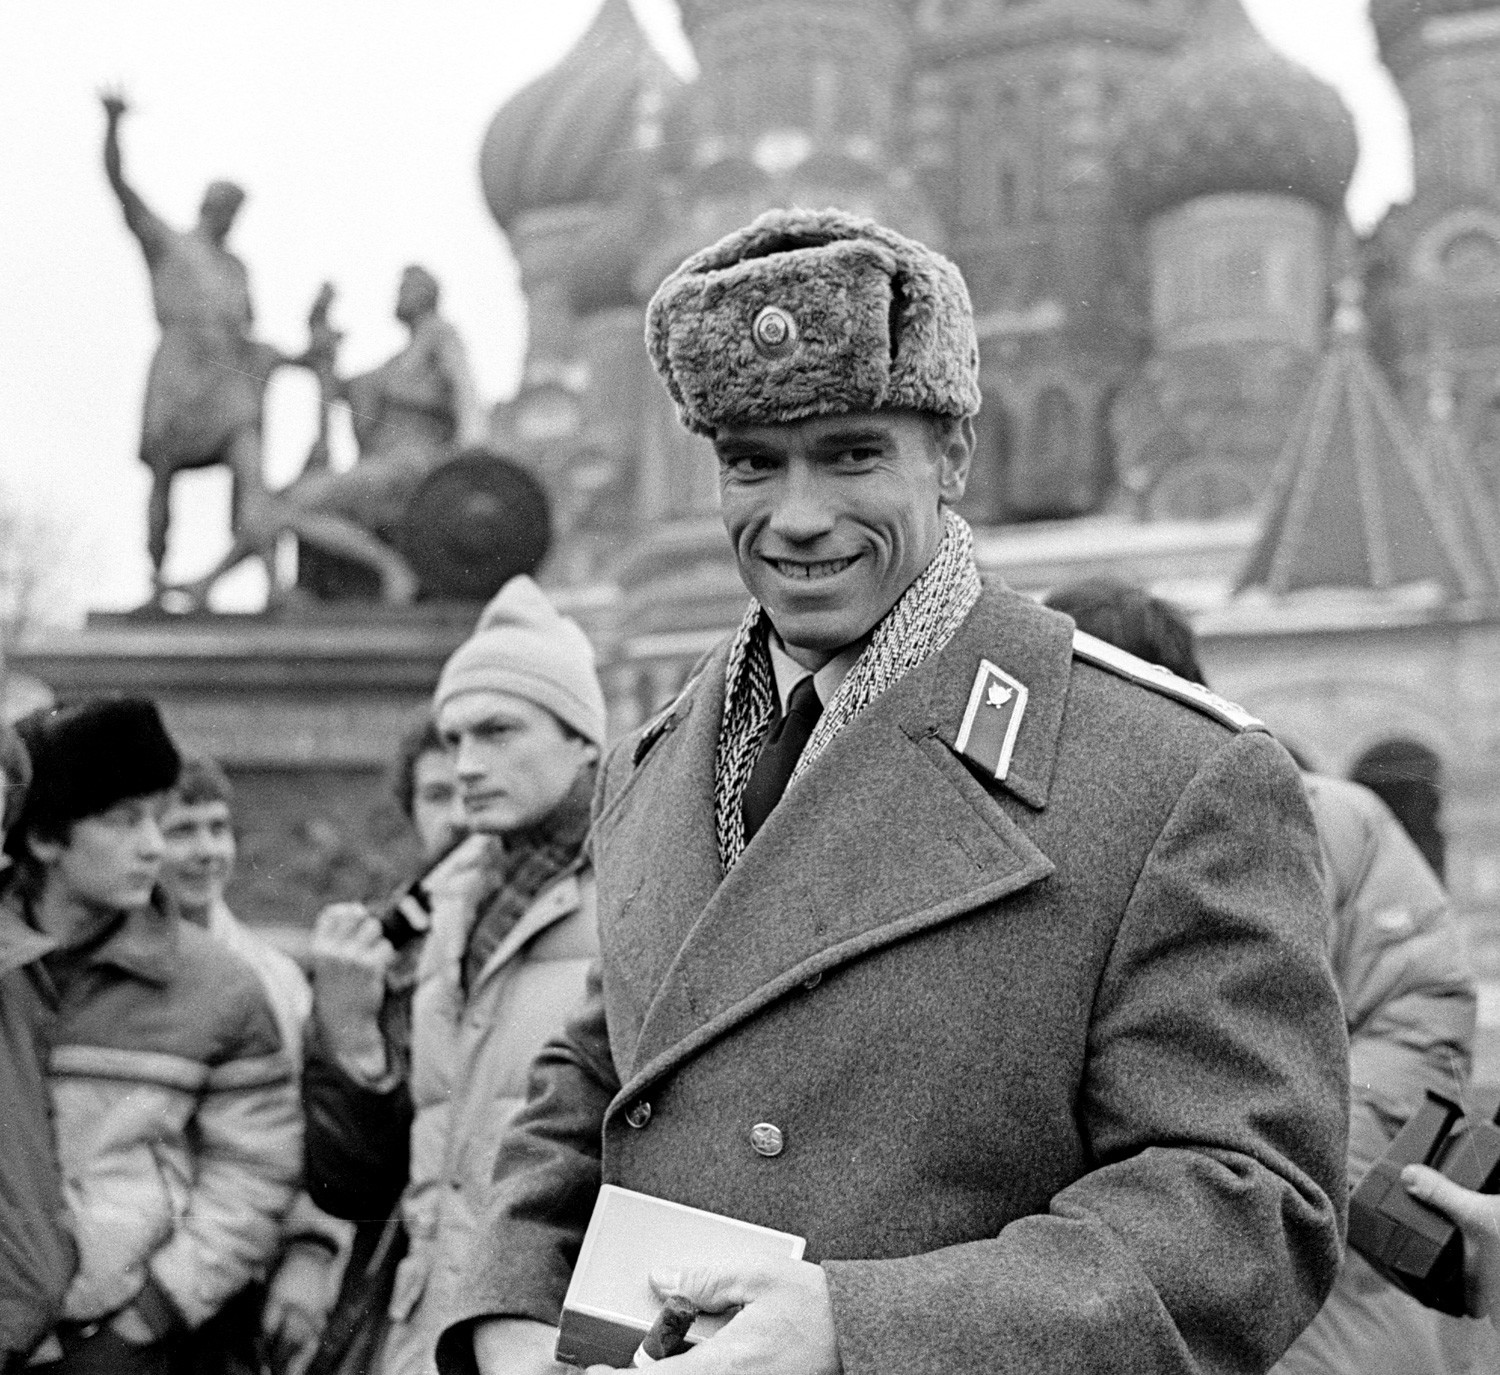 In 1988 Arnold Schwarzenegger wore the uniform of a Soviet policeman in the Red Square as they were shooting Red Heat movie there